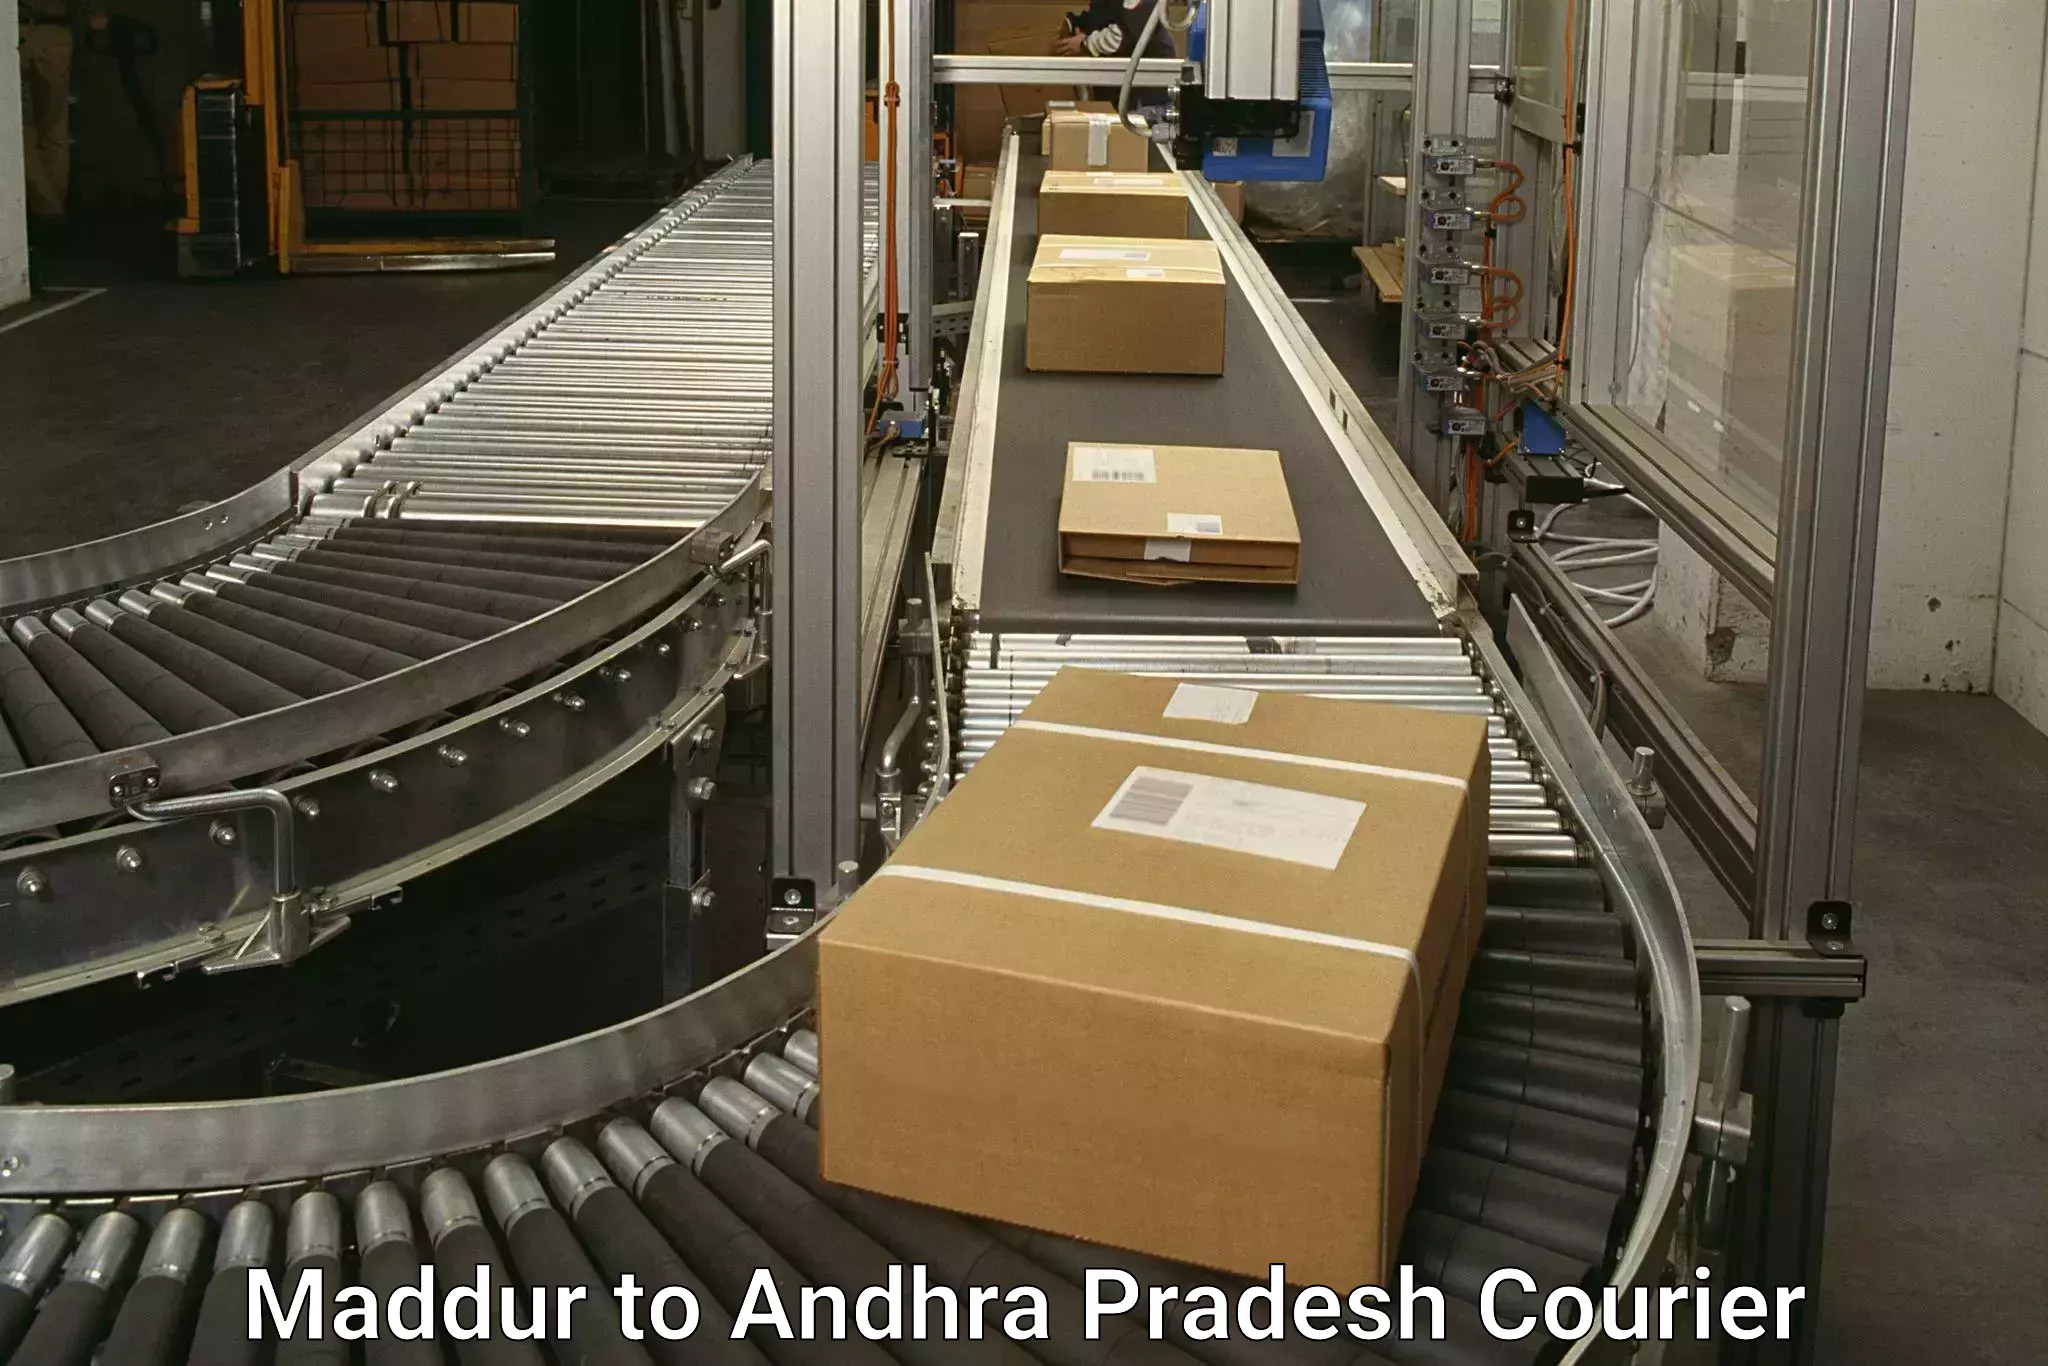 Efficient courier operations Maddur to Cuddapah